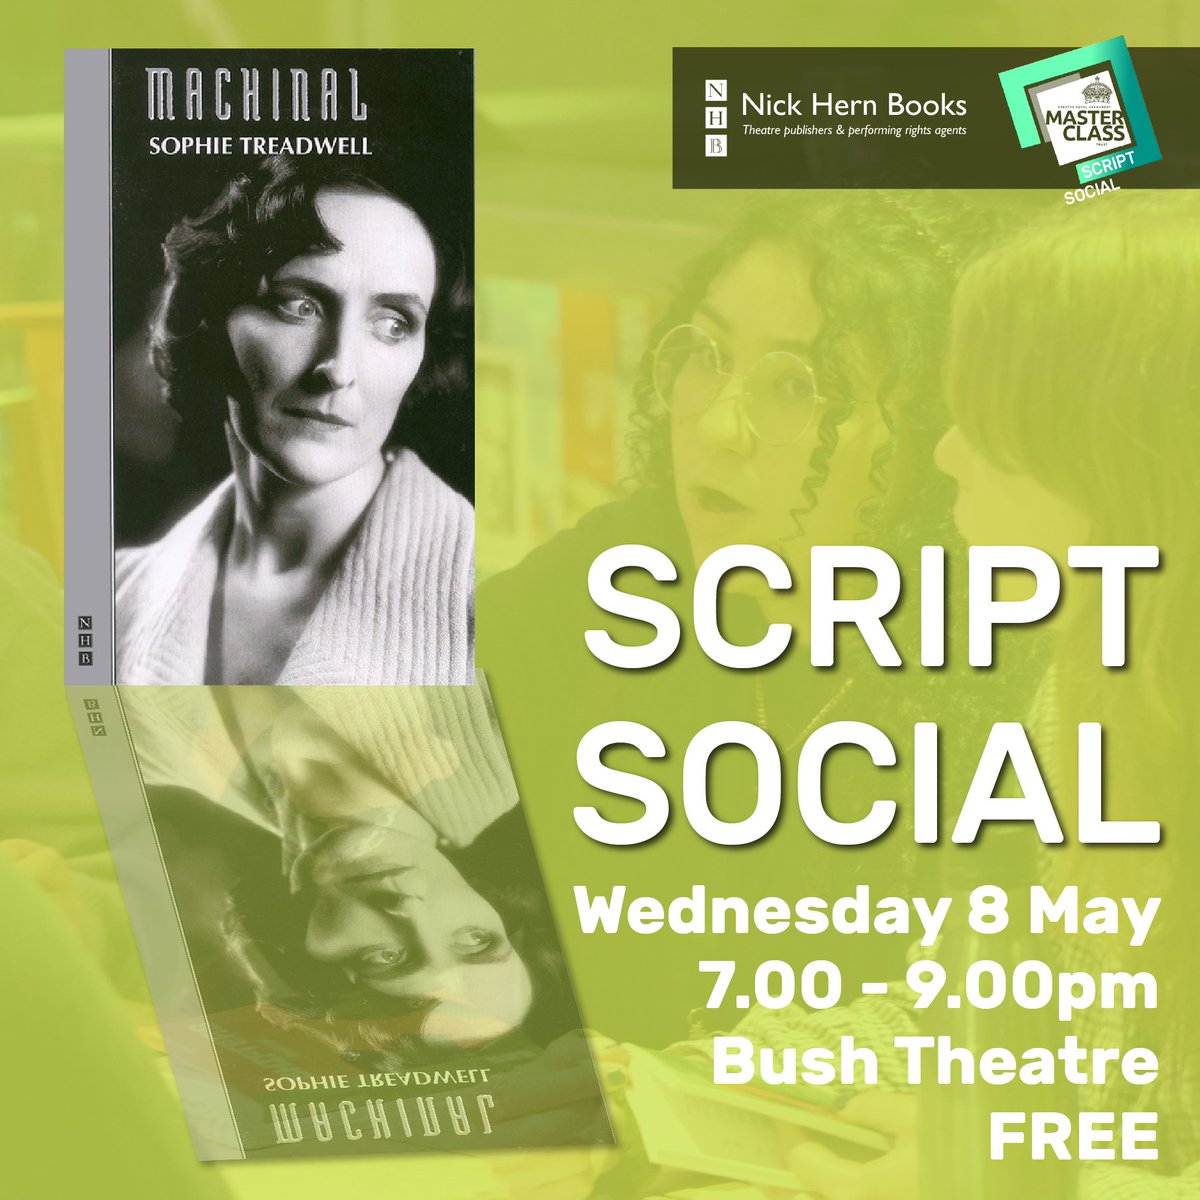 Love reading scripts!? Join us @BushTheatre to discuss Sophie Treadwell's play MACHINAL + Get 50% off the text with our exclusive deal from @NickHernBooks Dissect, discuss & delve into the heart of this expressionist theatre script, with friends old & new bit.ly/MachinalScript…